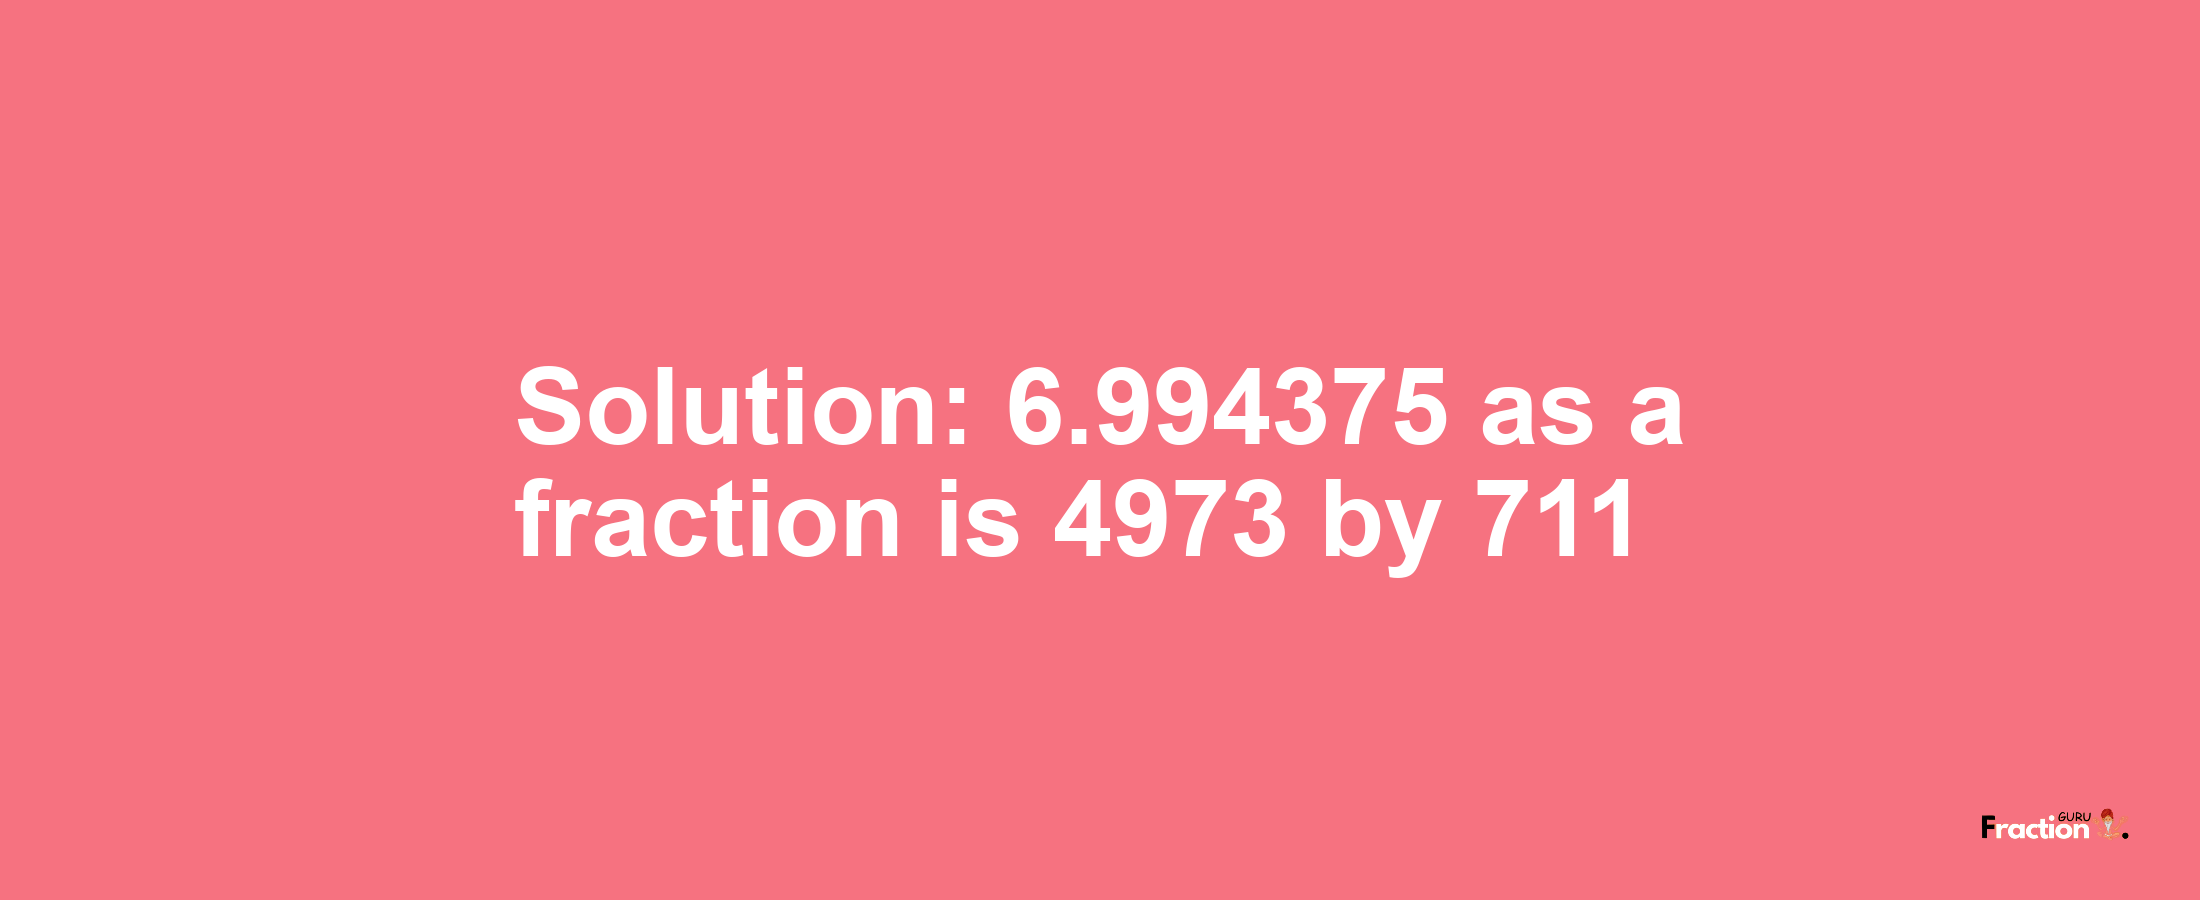 Solution:6.994375 as a fraction is 4973/711